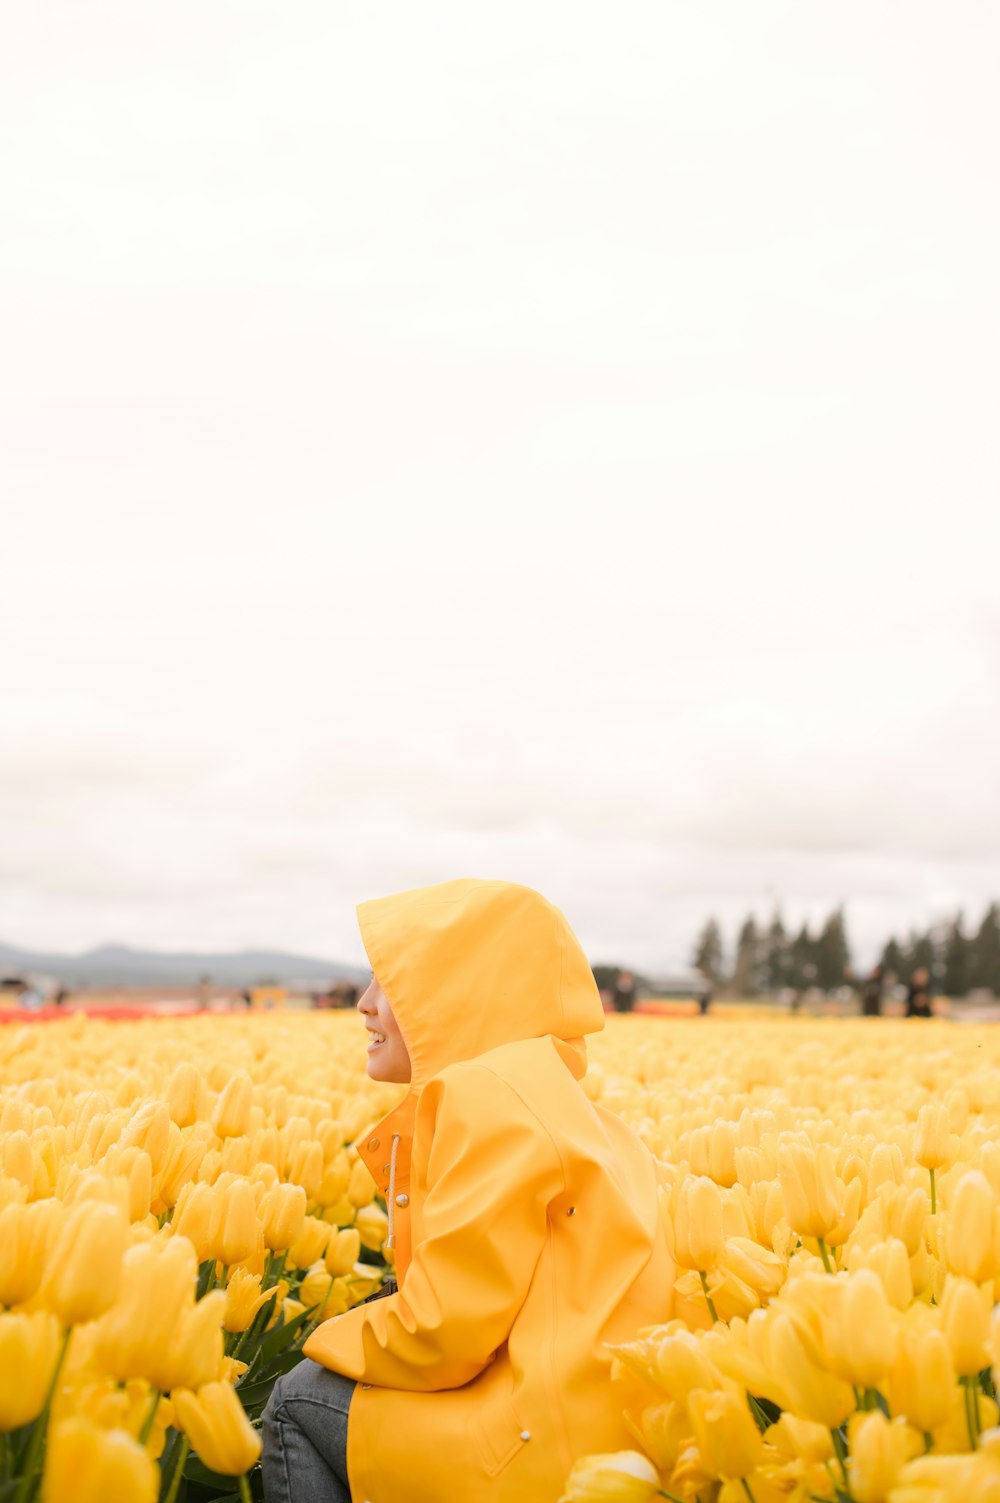 person in yellow raincoat standing on yellow tulip field